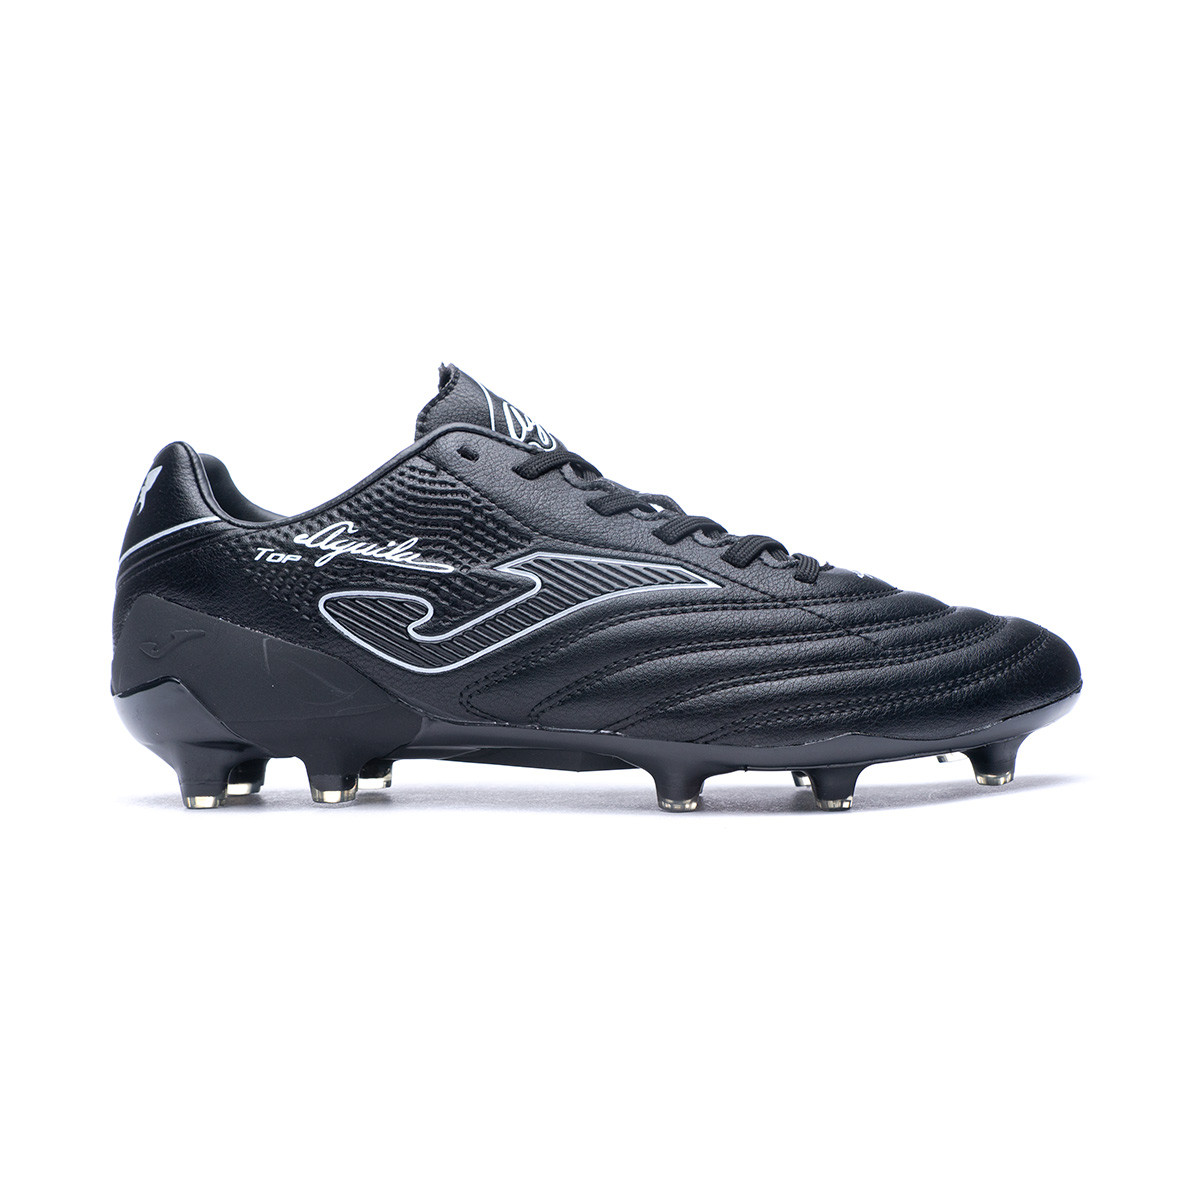 Fluo & White Joma AGUILA-GOL 301 Football Boots Removable Studs Black 